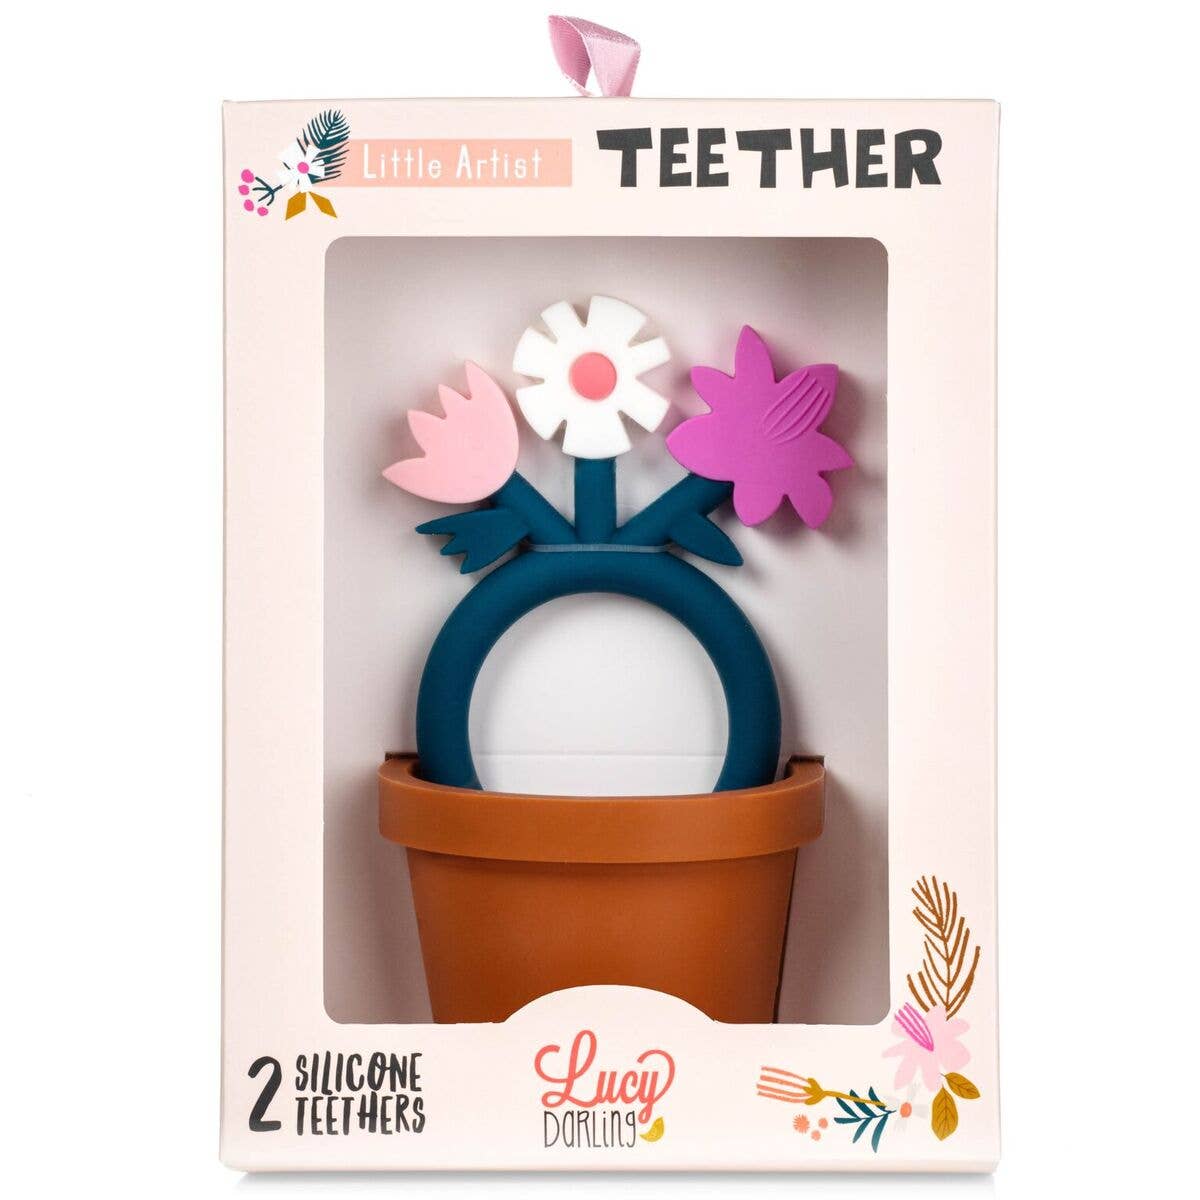 Lucy Darling teether toy